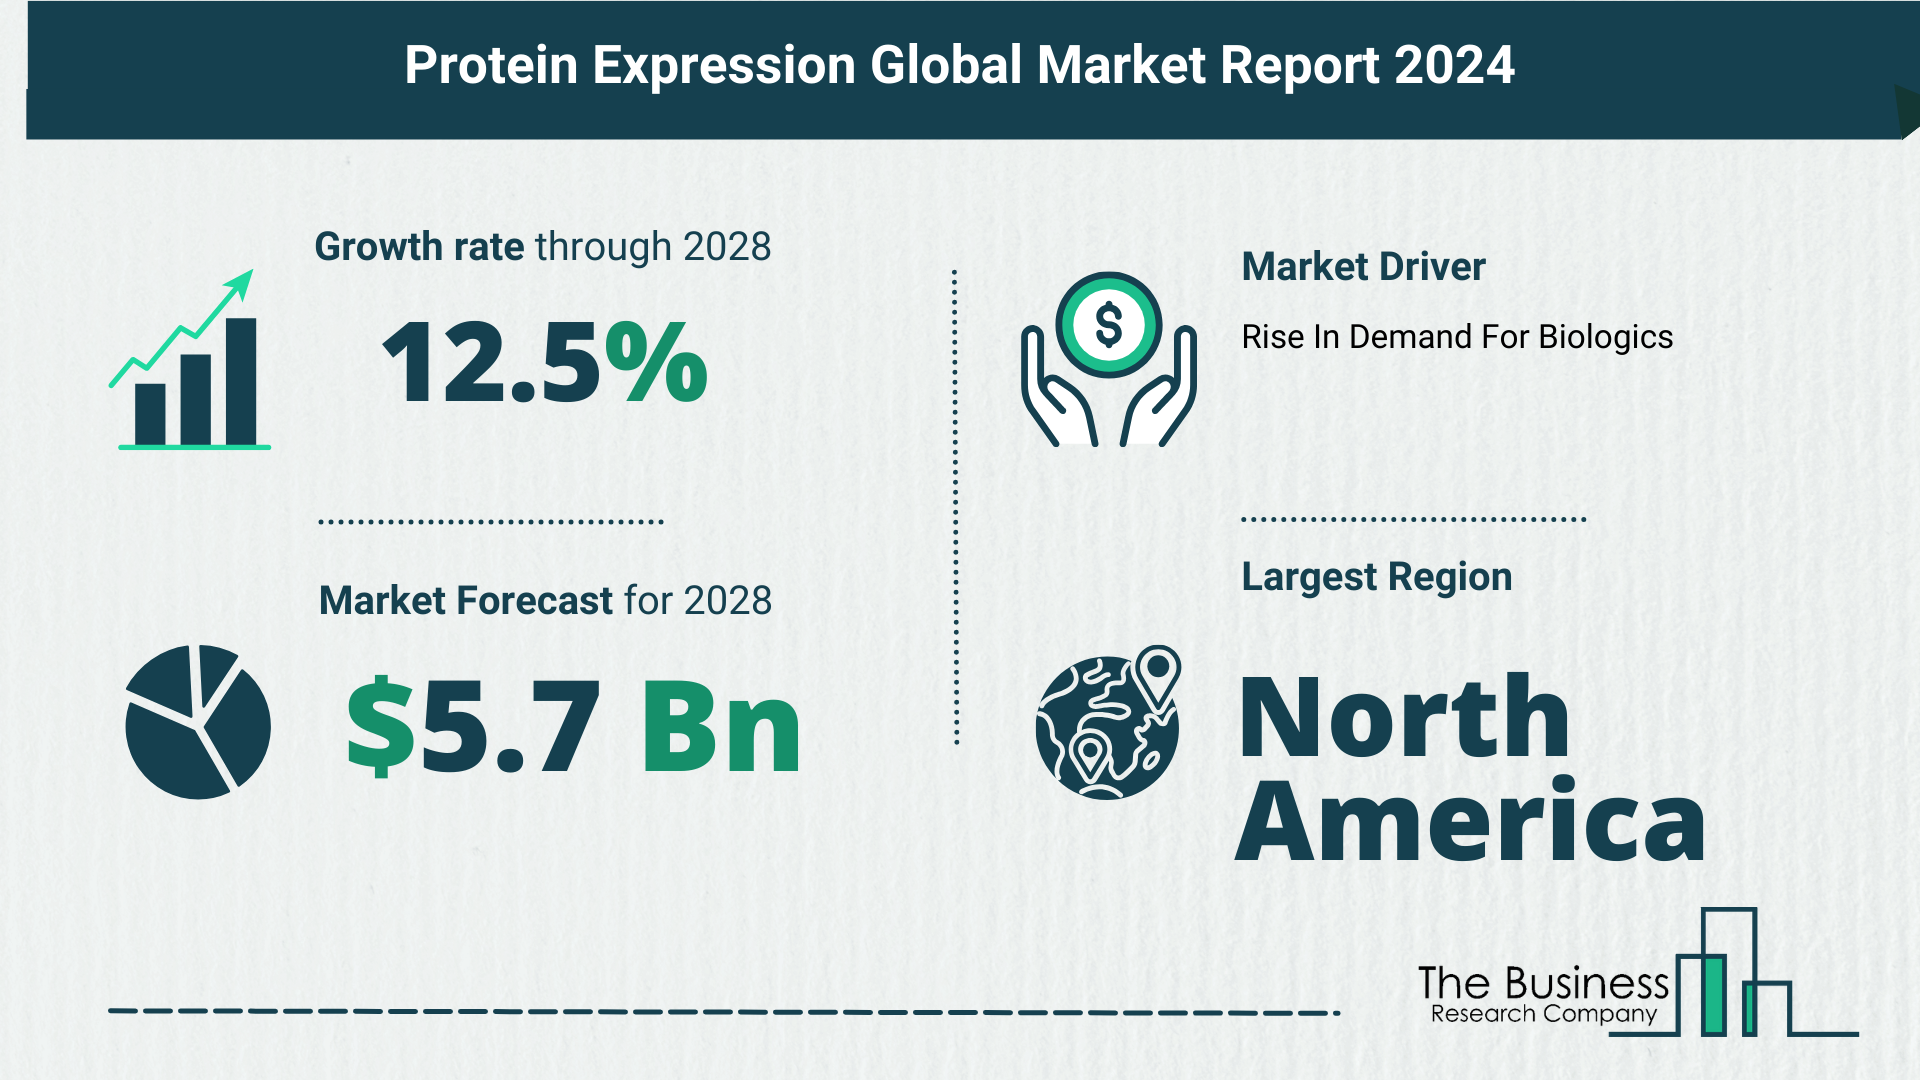 Key Trends And Drivers In The Protein Expression Market 2024